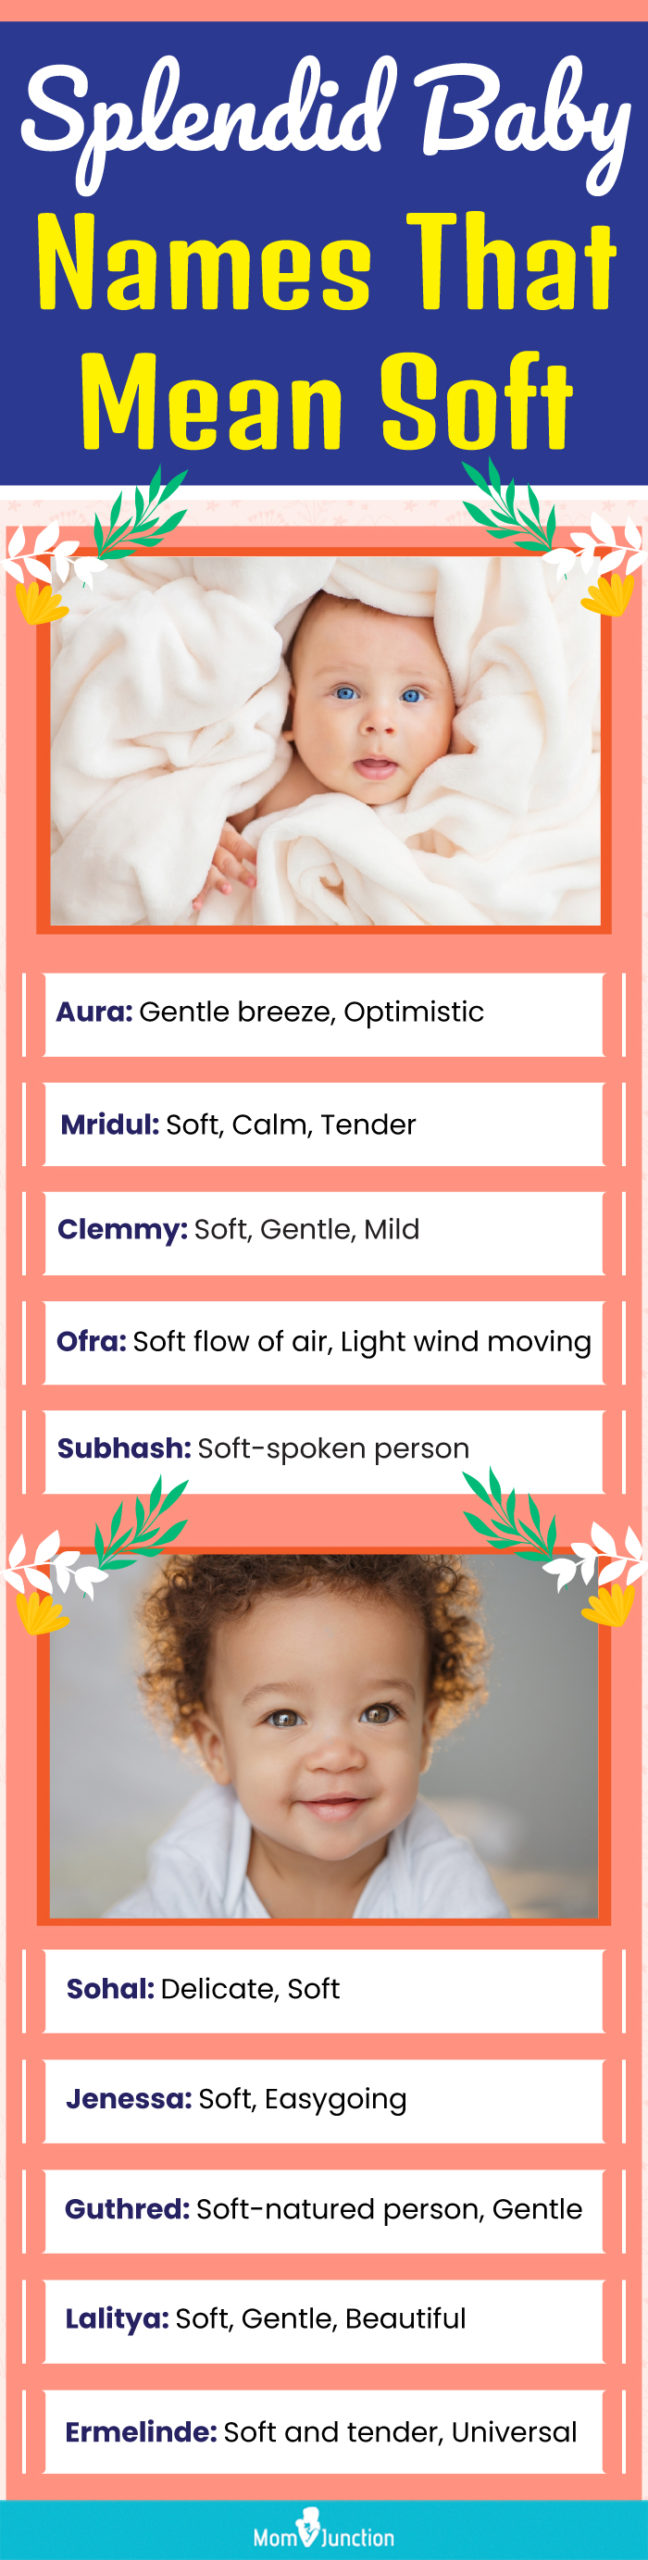 splendid baby names that mean soft (infographic)